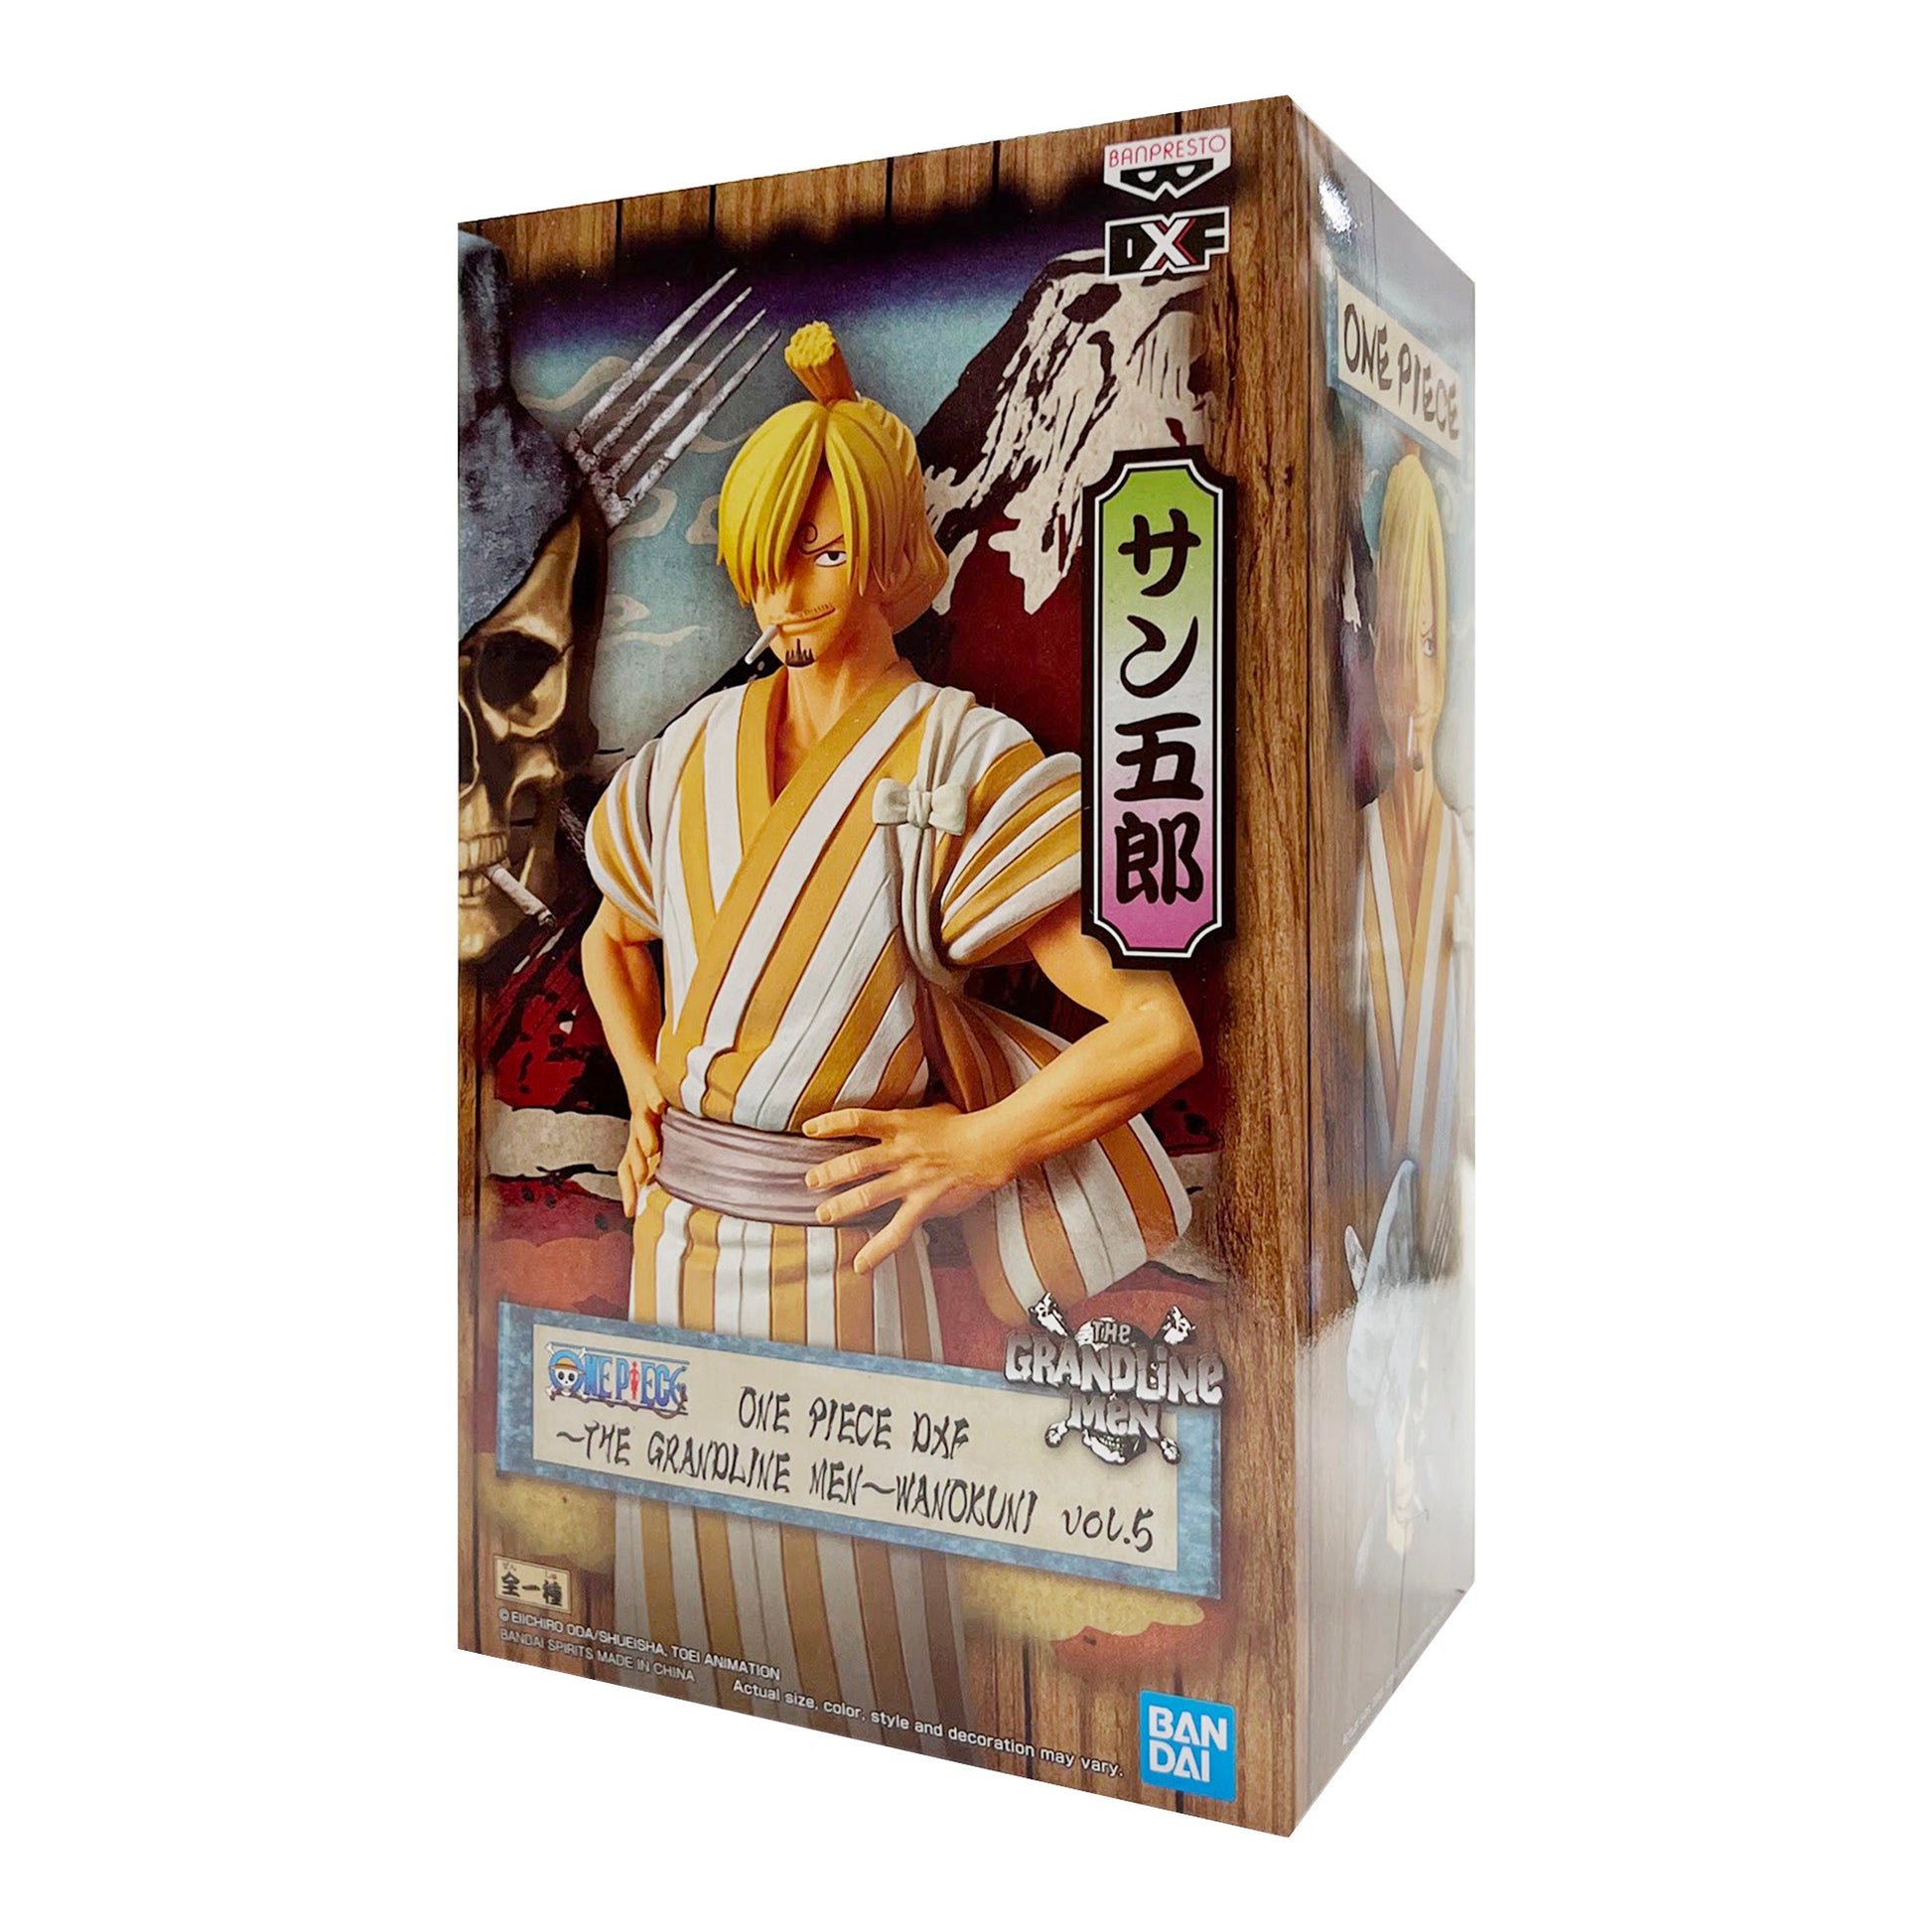 OFFICIAL Sanji【Exclusive on One Piece Figure】